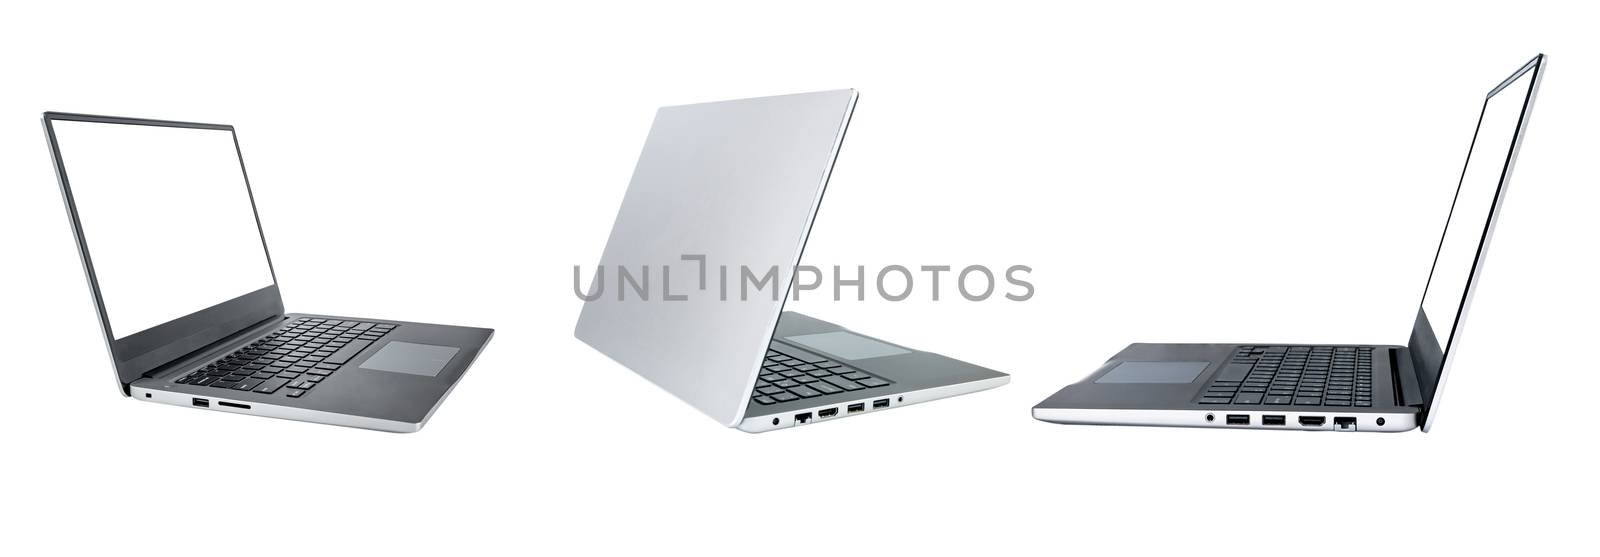 collection, Modern slim design laptop, with blank screen, Aluminum material isolated on white background. template laptop Mock up. File contains with clipping path so easy to work.